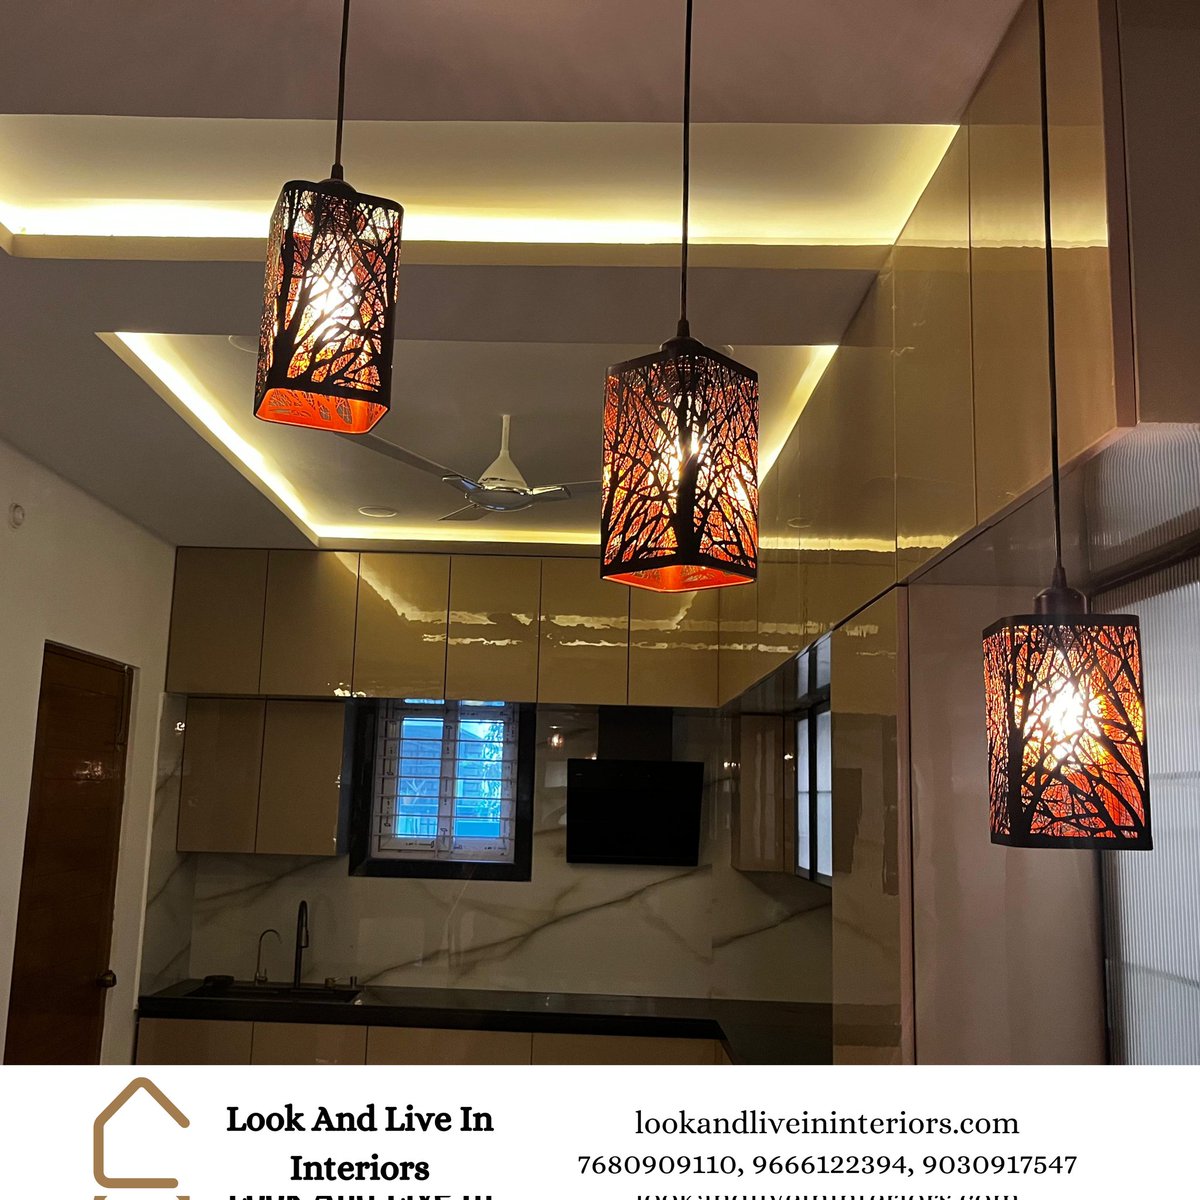 Make a statement with our custom lighting solutions tailored to your unique style #interiores #italiandesign #interiordesign #interiorstyling #interiorstyling #homeinterior #homeinteriors #homedecor #homedesign #hyderabadinteriorsdesigners #interiordesignershyderabad #trending